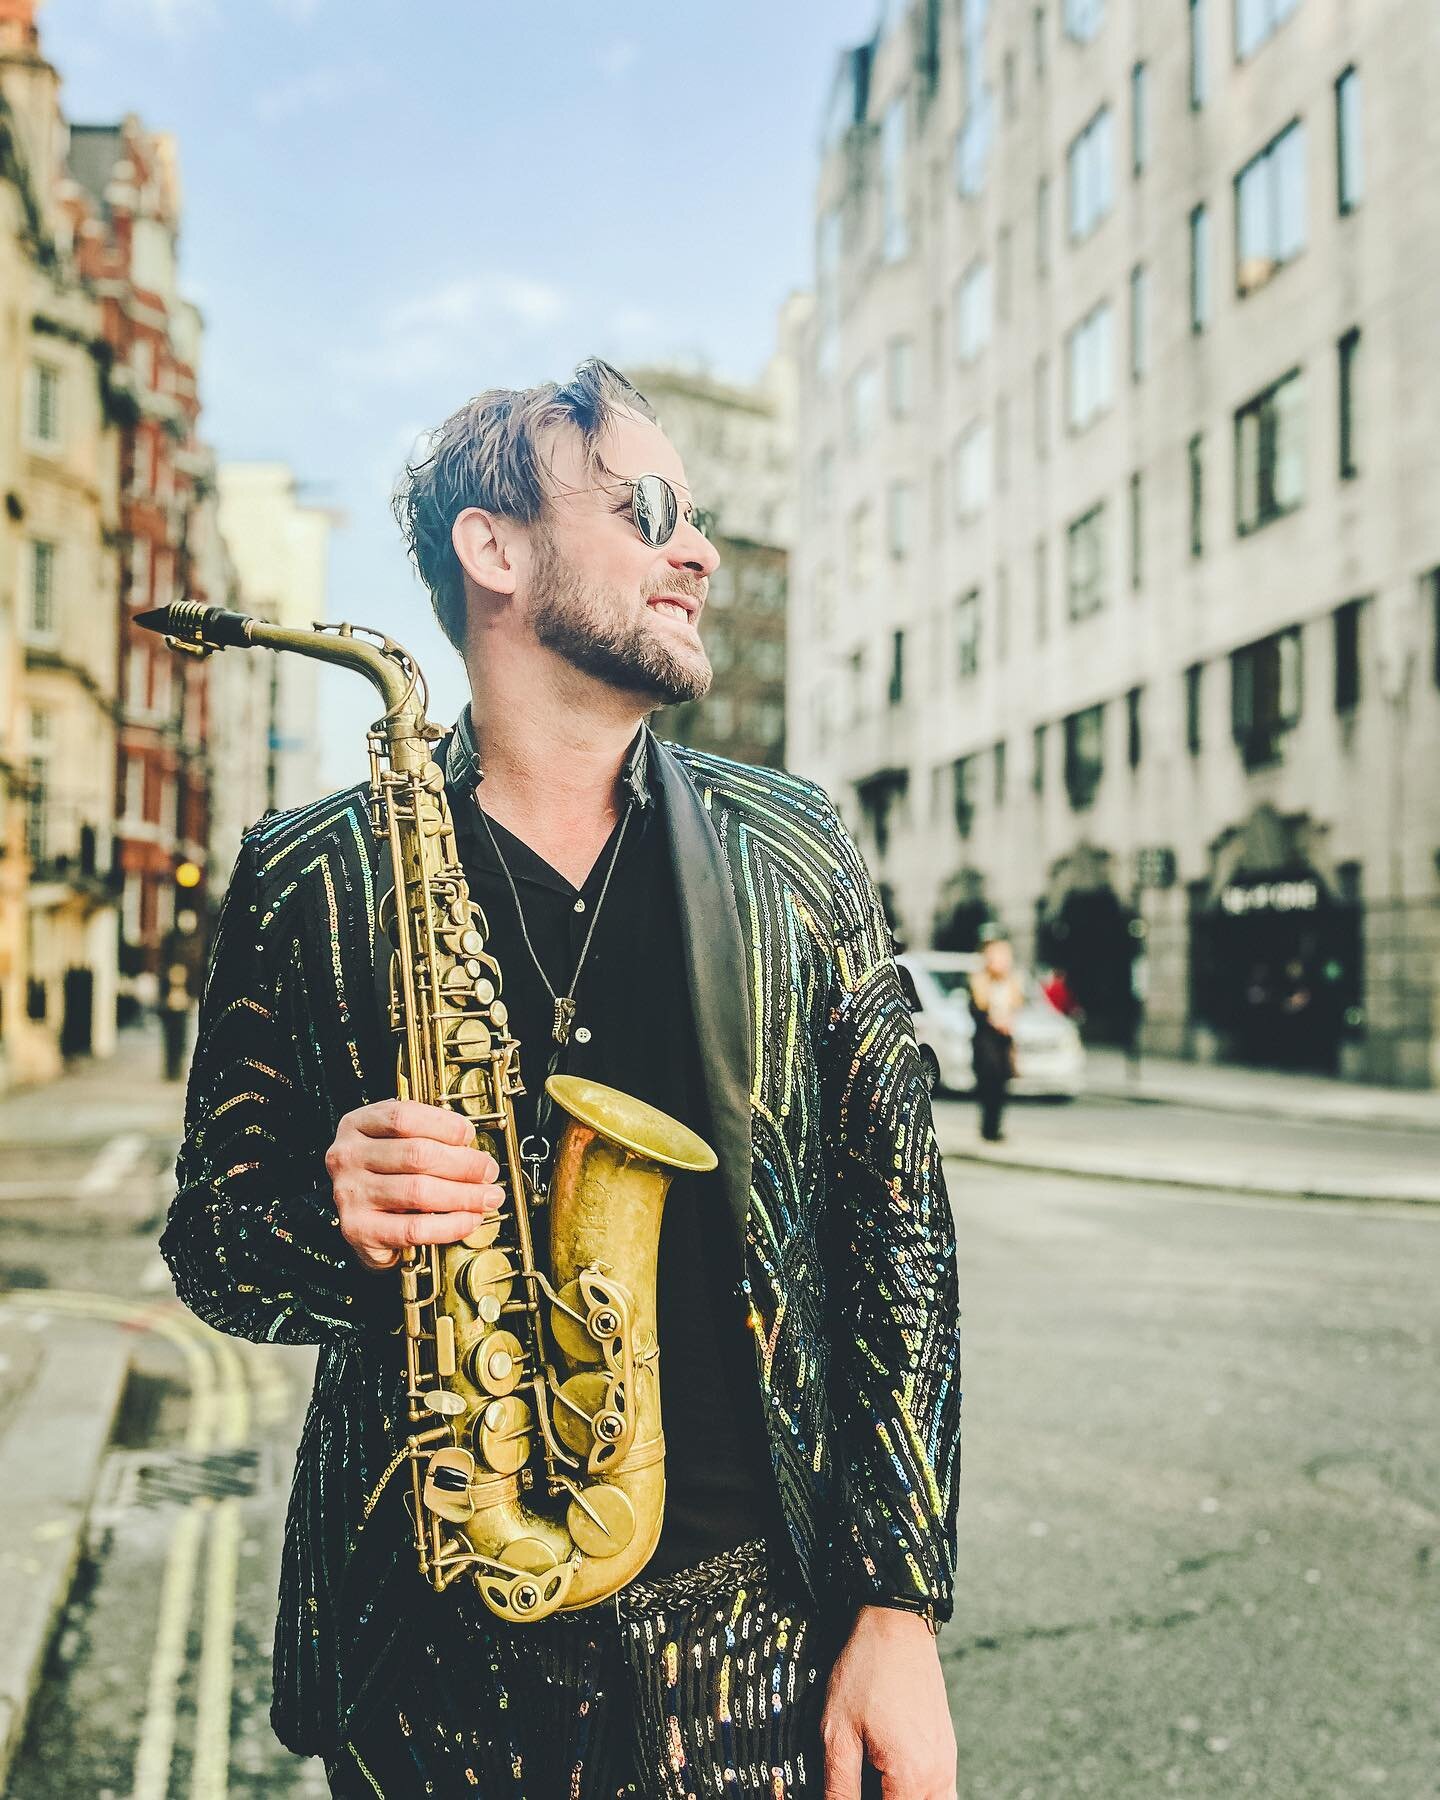 Saxophone is one thing, but with the right music it&rsquo;s another BANG 💥🎷🎶
.
📸 by @forstermartin_foto 
.
.
#maxthesax #saxophone #music #london #mayfair #streetstyle #selmer #mark7 
#altosax #saxplayer #lifeisgood